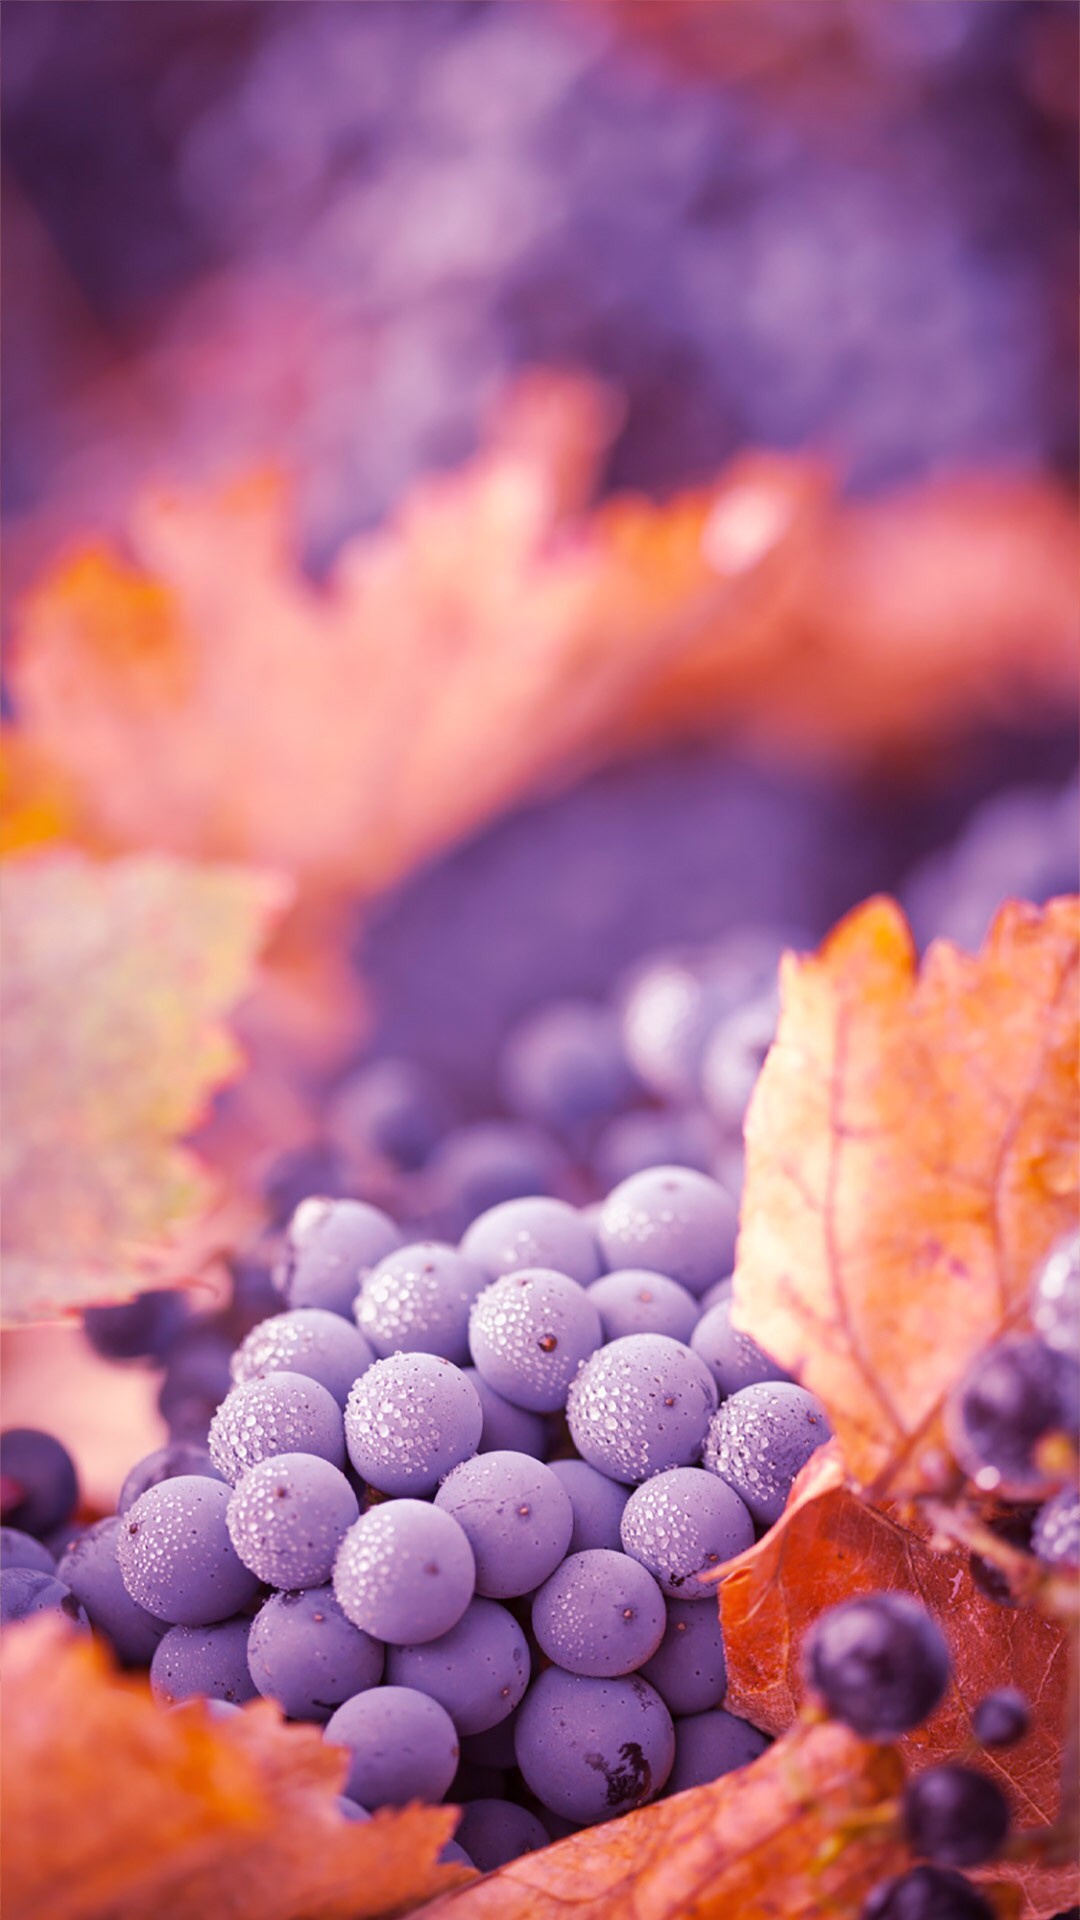 Grapes: Small, oval fruits that grow in bunches on vines. 1080x1920 Full HD Wallpaper.